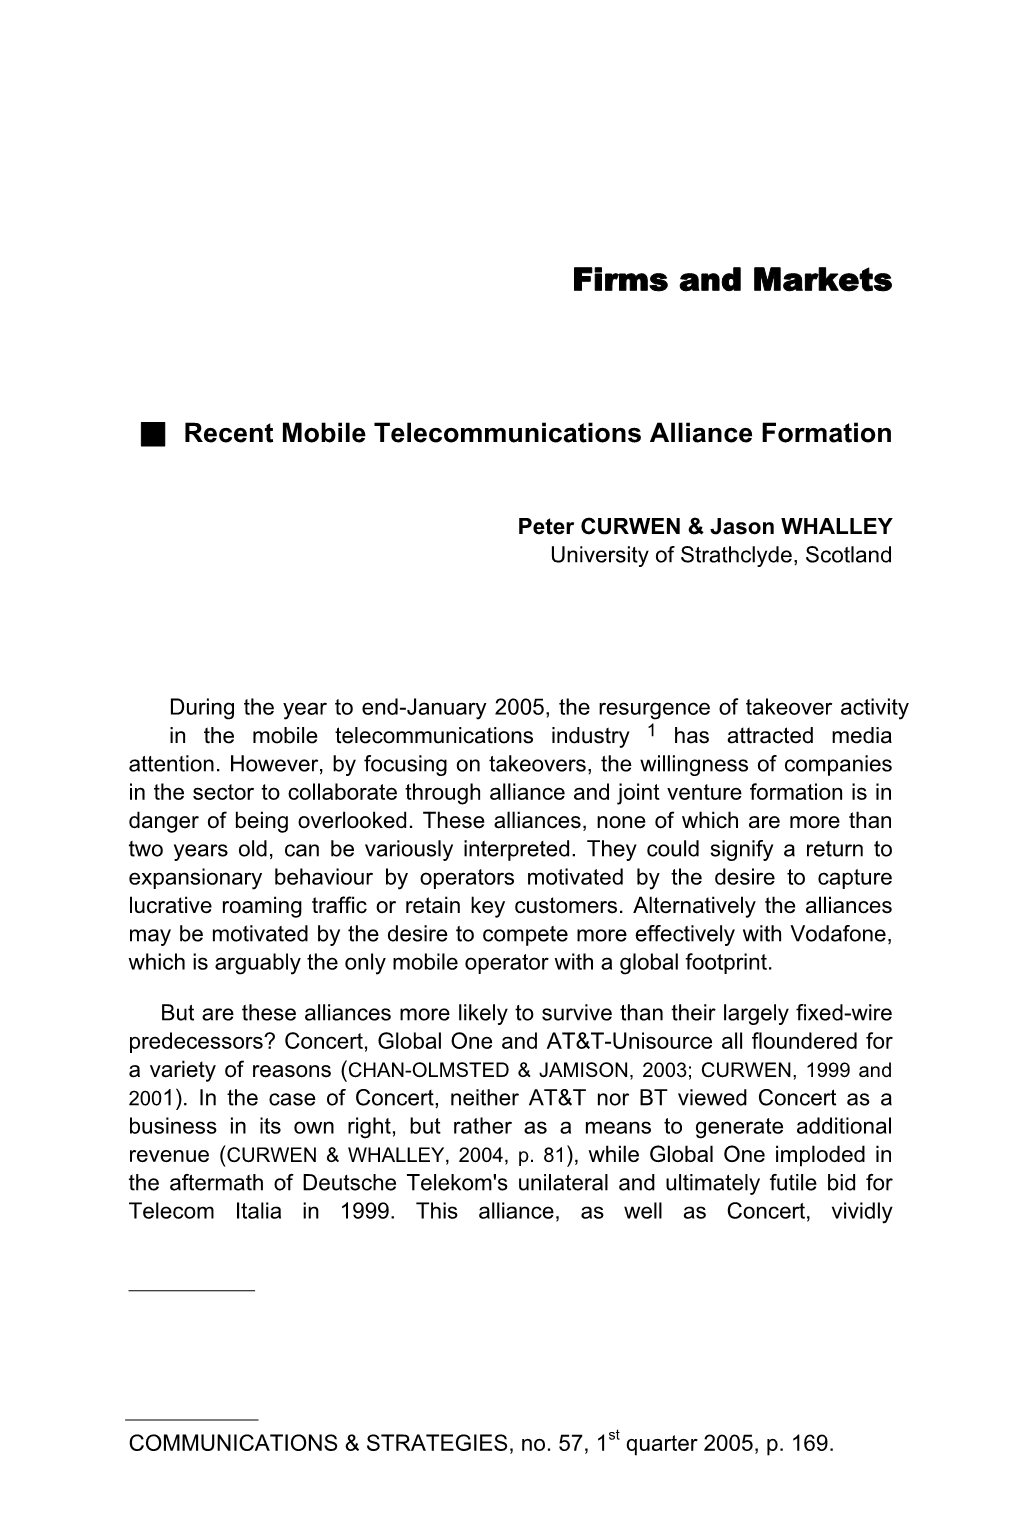 Recent Mobile Telecommunications Alliance Formation